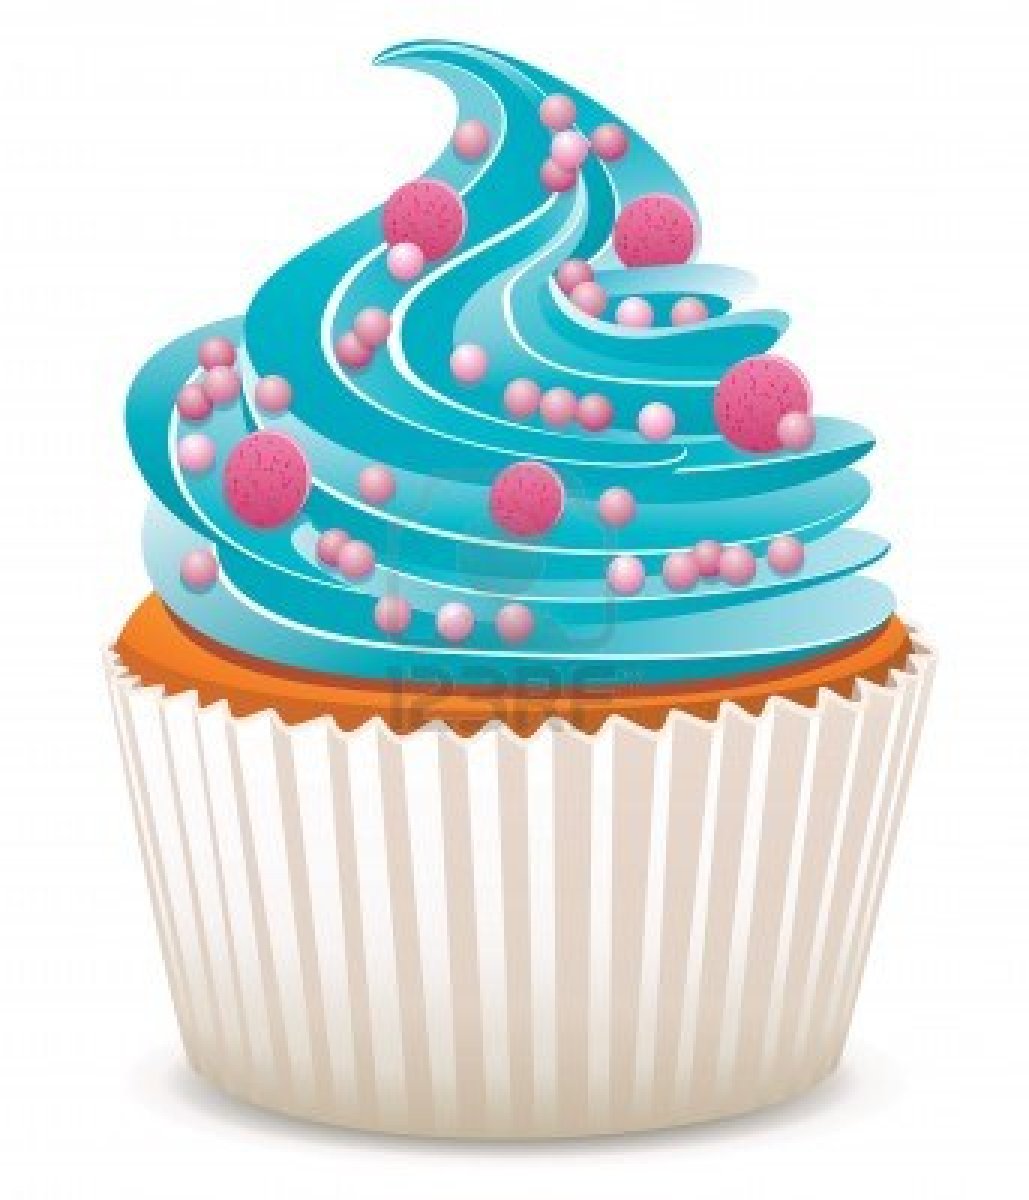 Sprinkles clipart cupcake. Cupcakes with station 